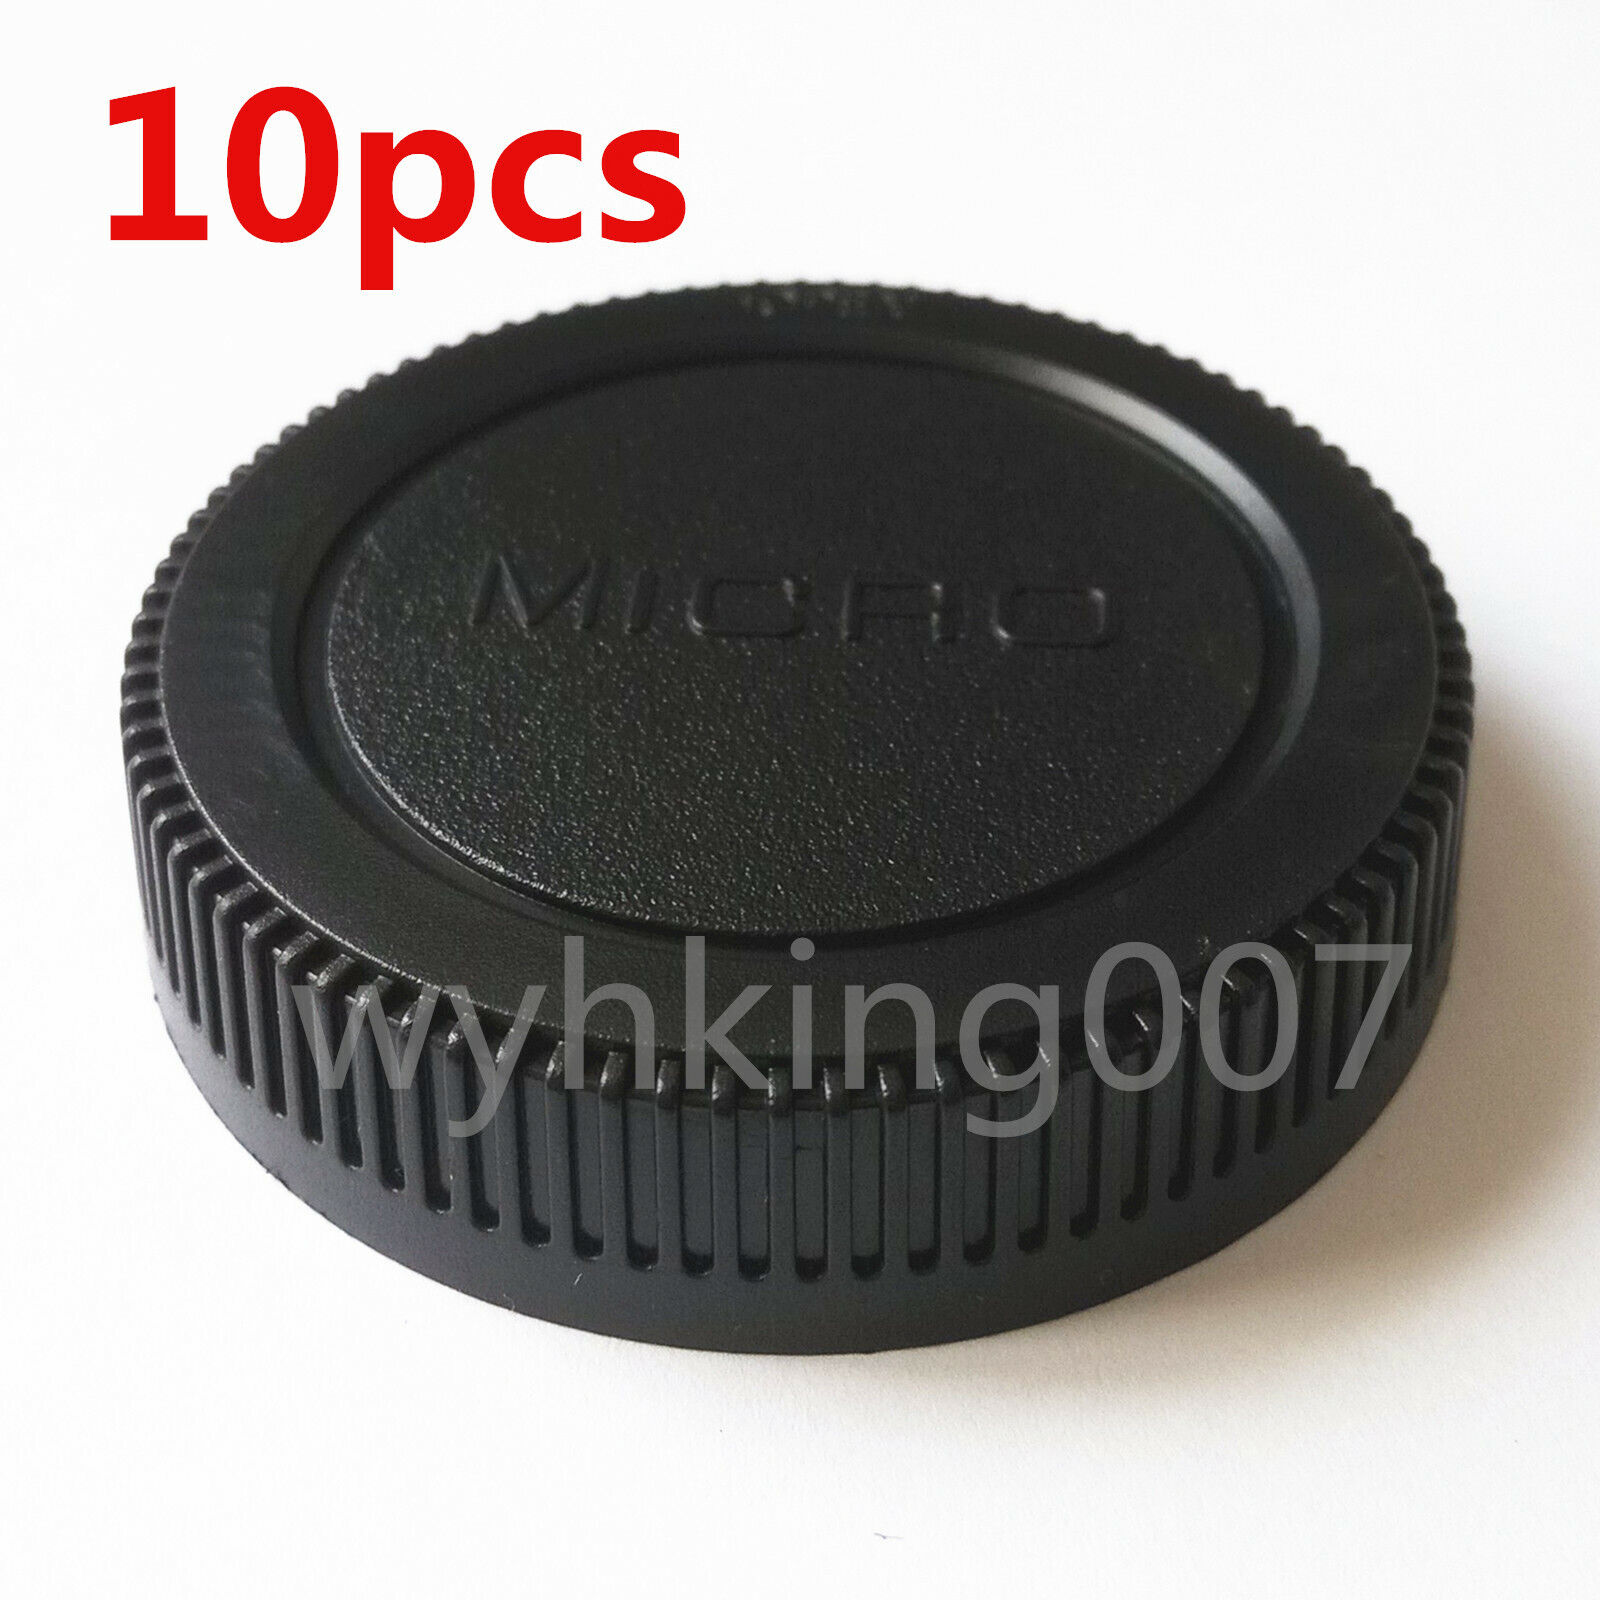 10PCS Olympus Lumix Micro4/3 Micro 4/3 M4/3 Rear Lens Cap Micro Four Thirds m43 Unbranded/Generic Does not apply